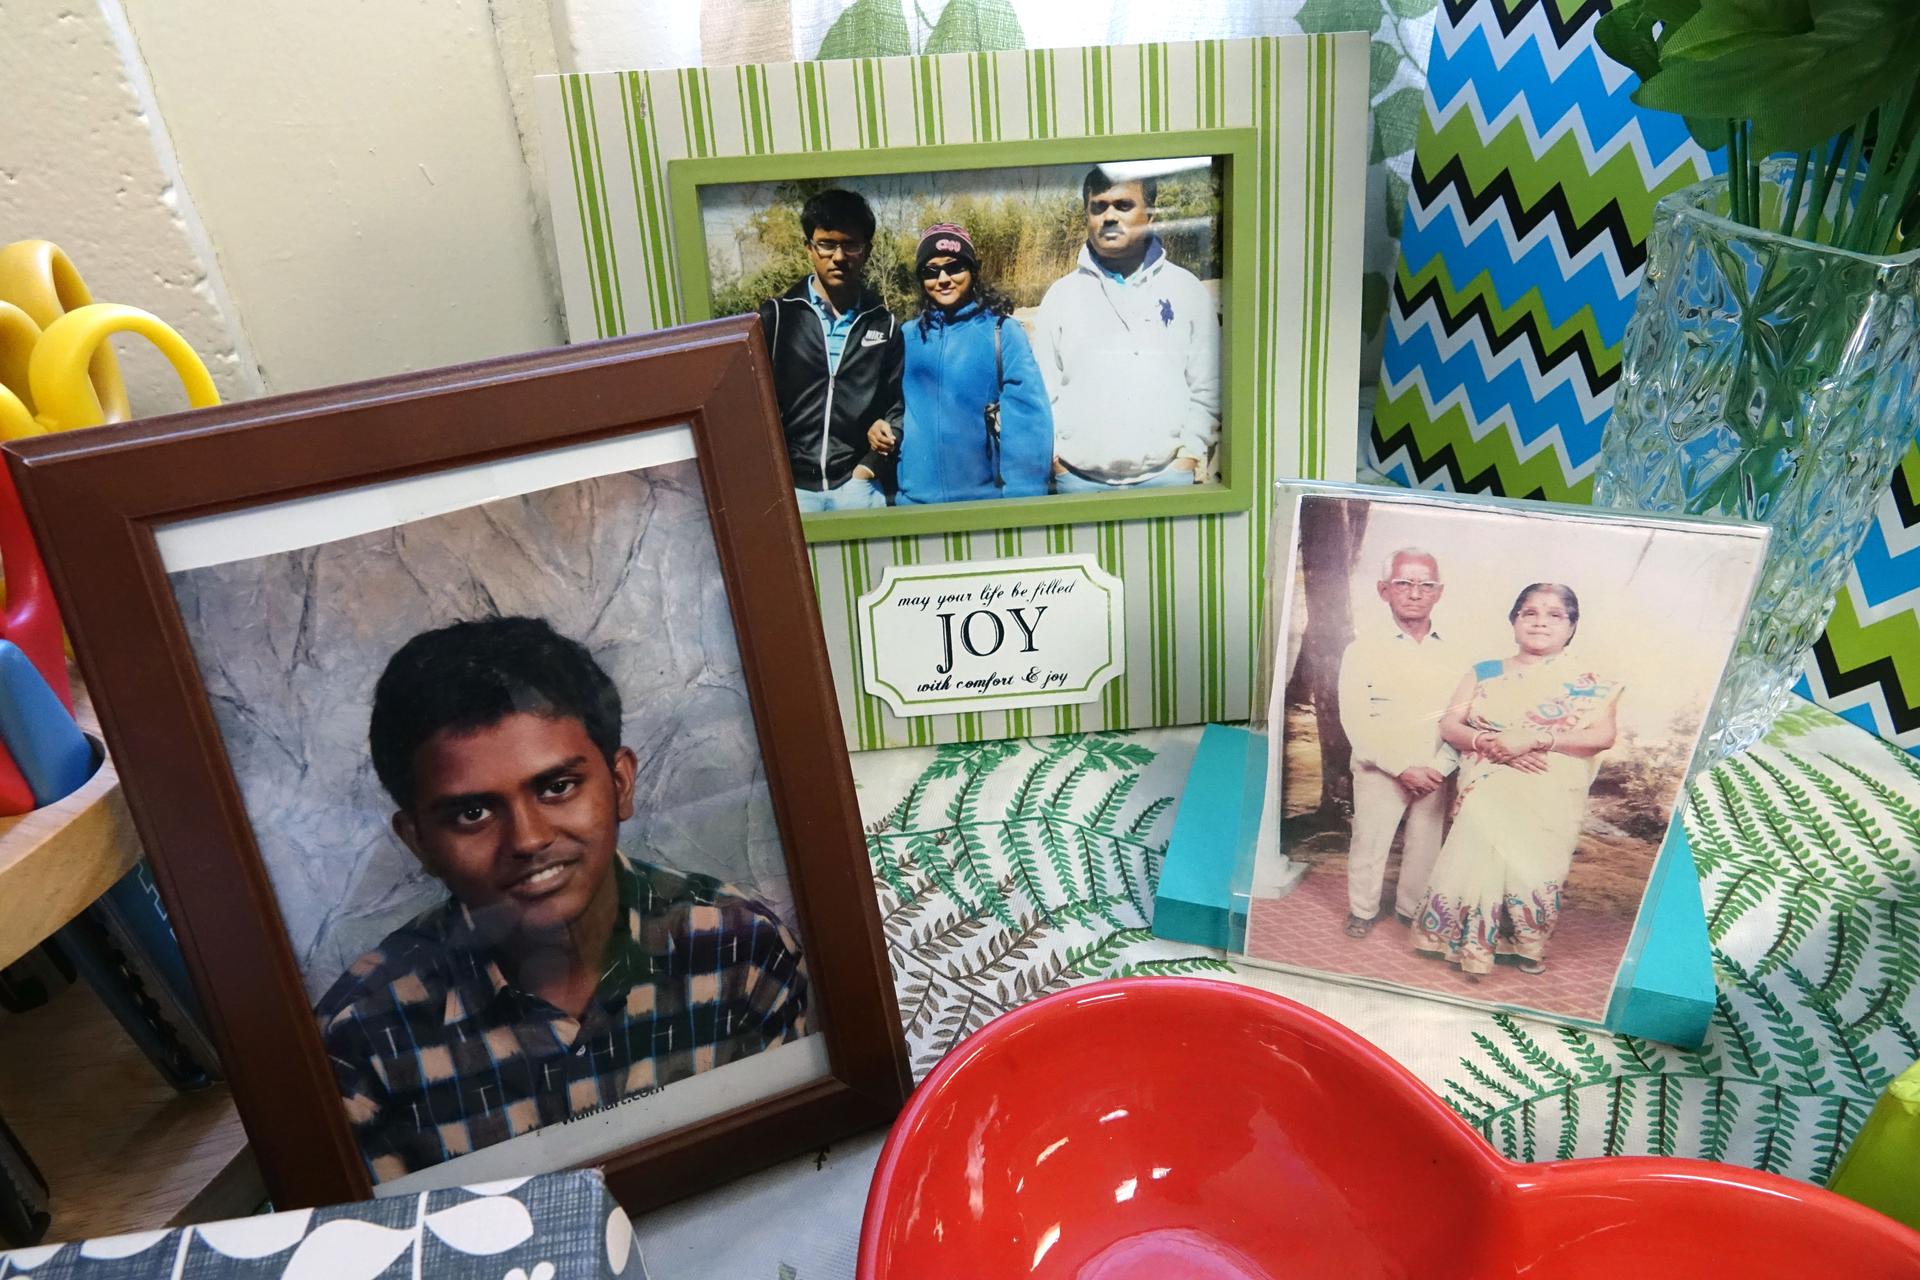 Photo frames with pictures of young boy, elderly couple, family